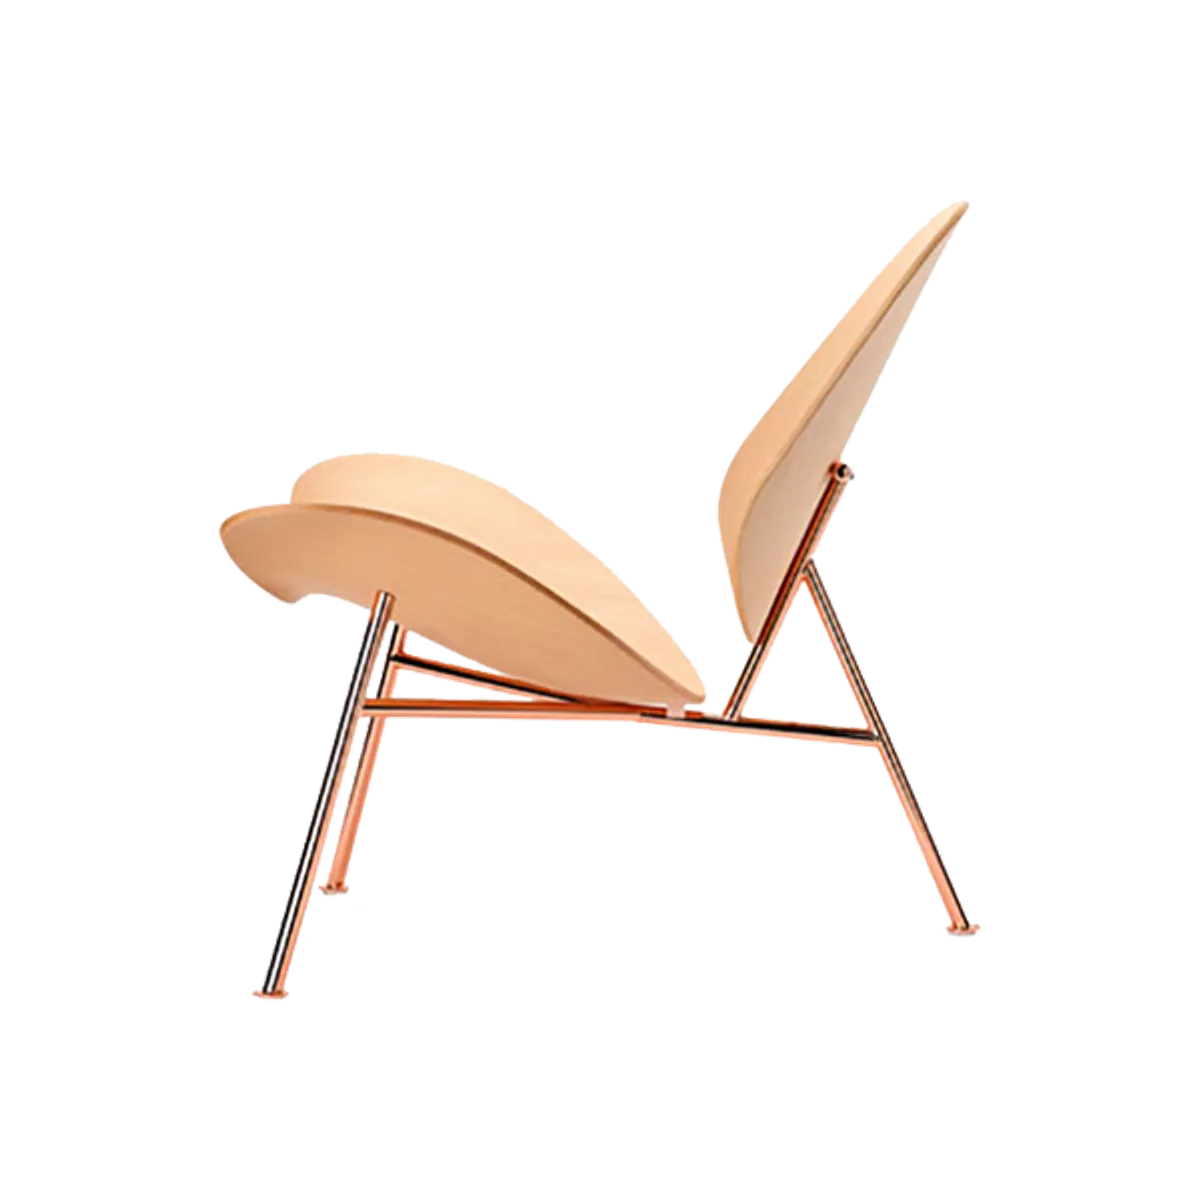 Web Conchilia Lounge Chair Wooden Furniture With Metal Frame